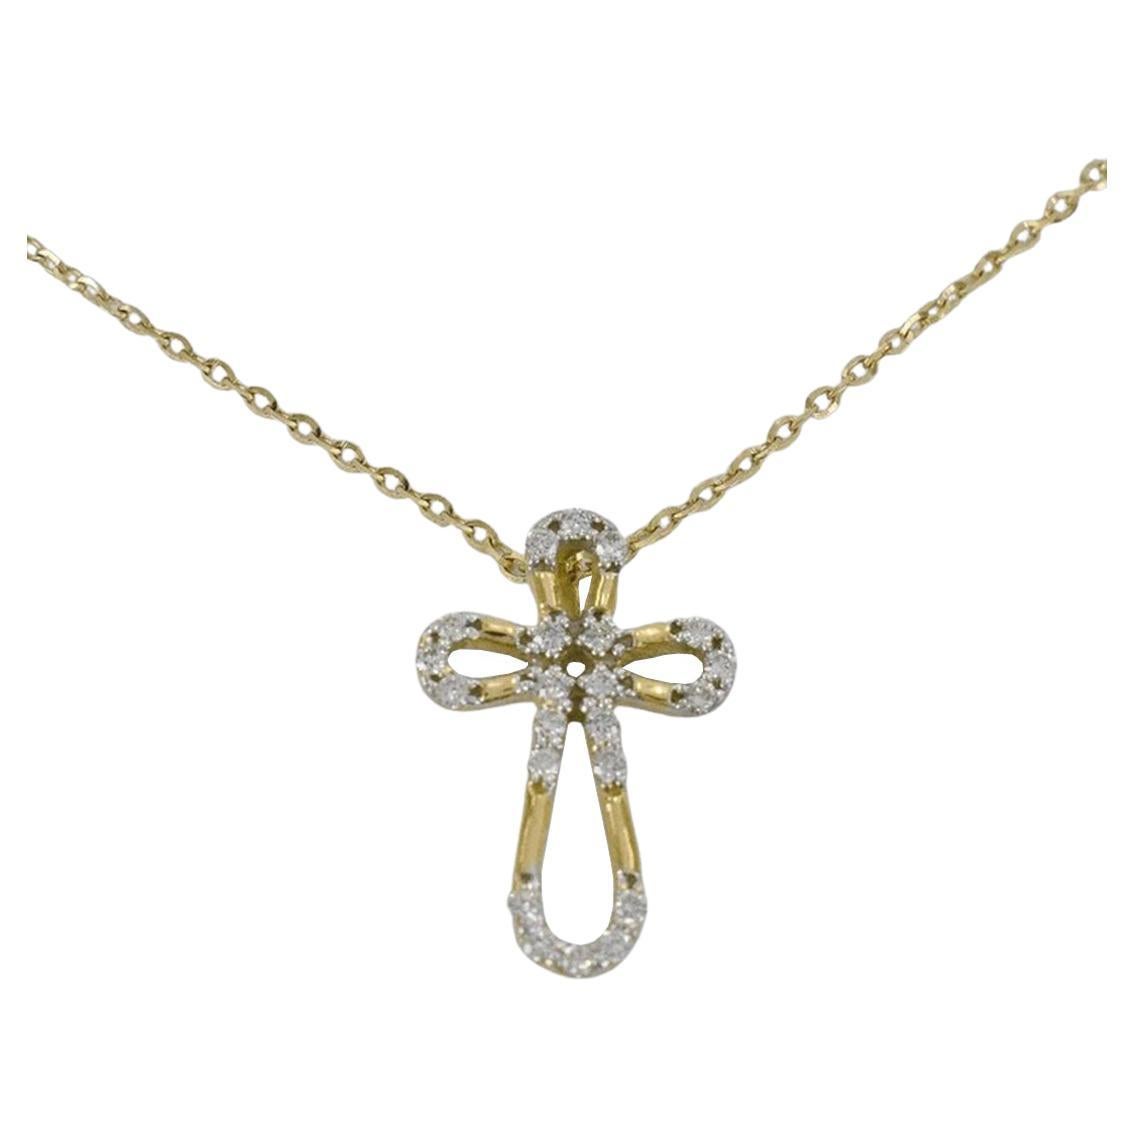 Delicate Minimal Cross Necklace is made of 18k solid gold available in three colors of gold, White Gold / Rose Gold / Yellow Gold.

Lightweight and gorgeous natural genuine round cut diamond. Each diamond is hand selected by me to ensure quality and